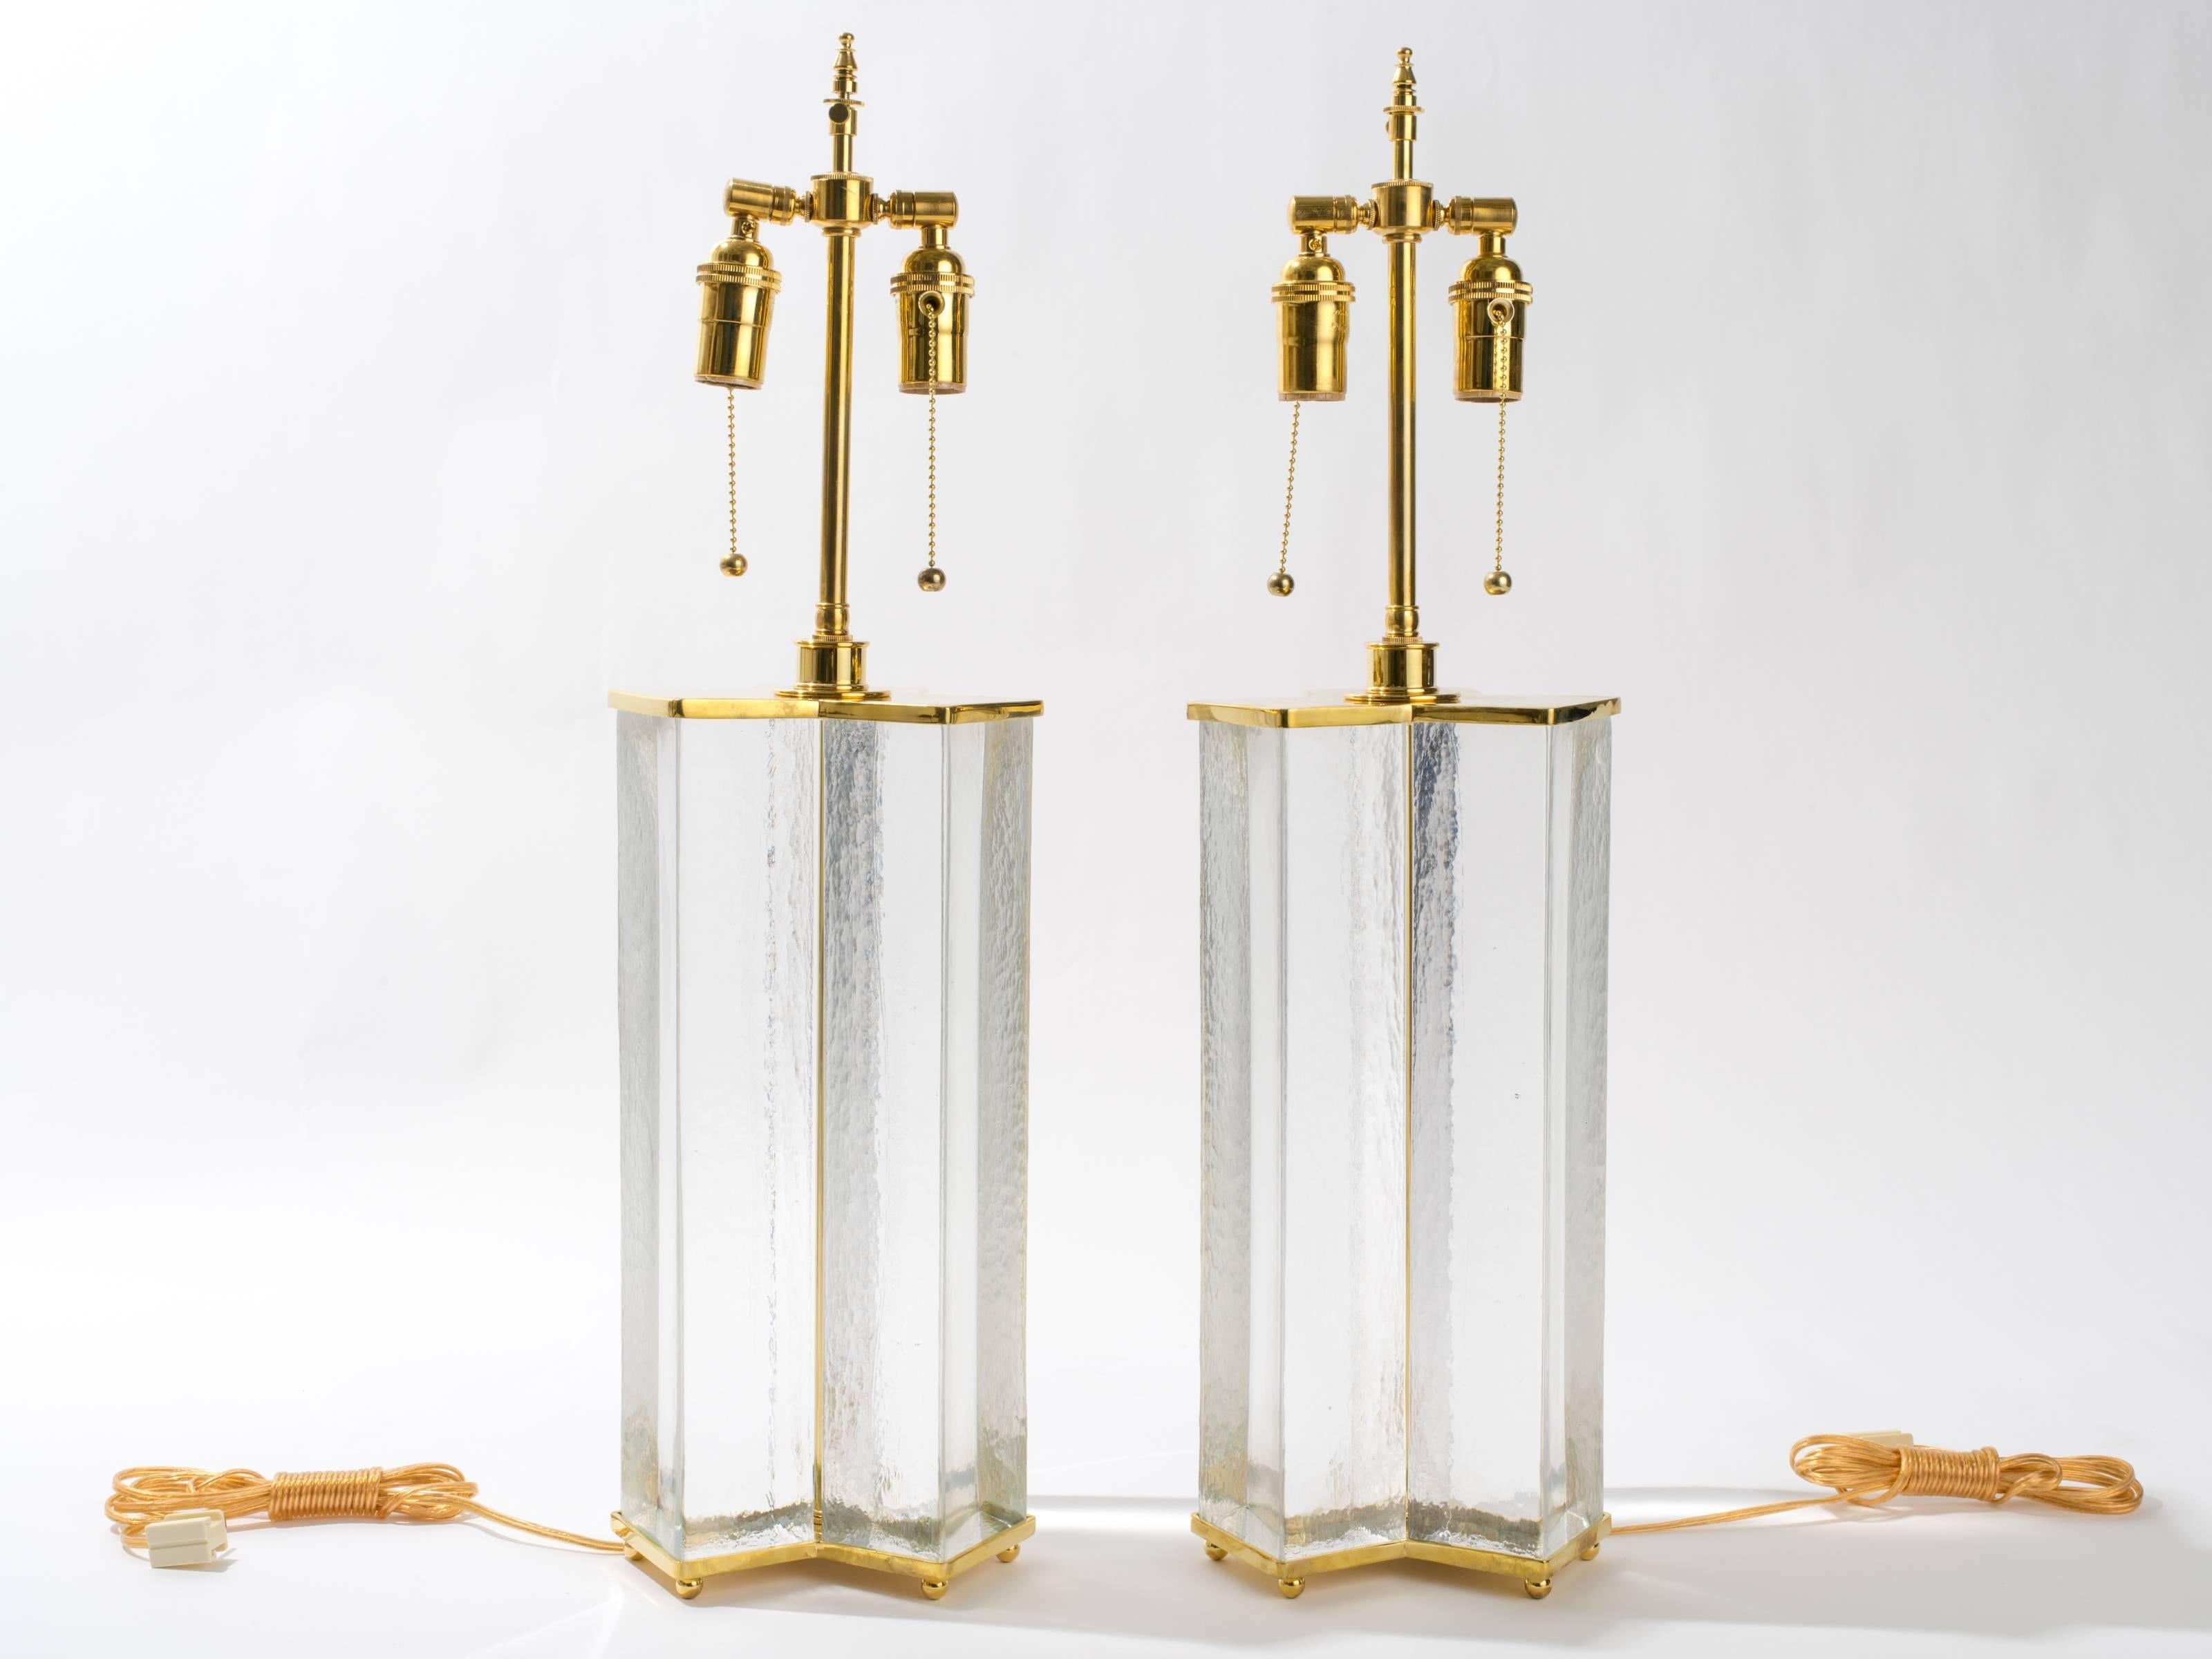 Solid clear glass and brass table lamps.
Double pull chain sockets with adjustable height.